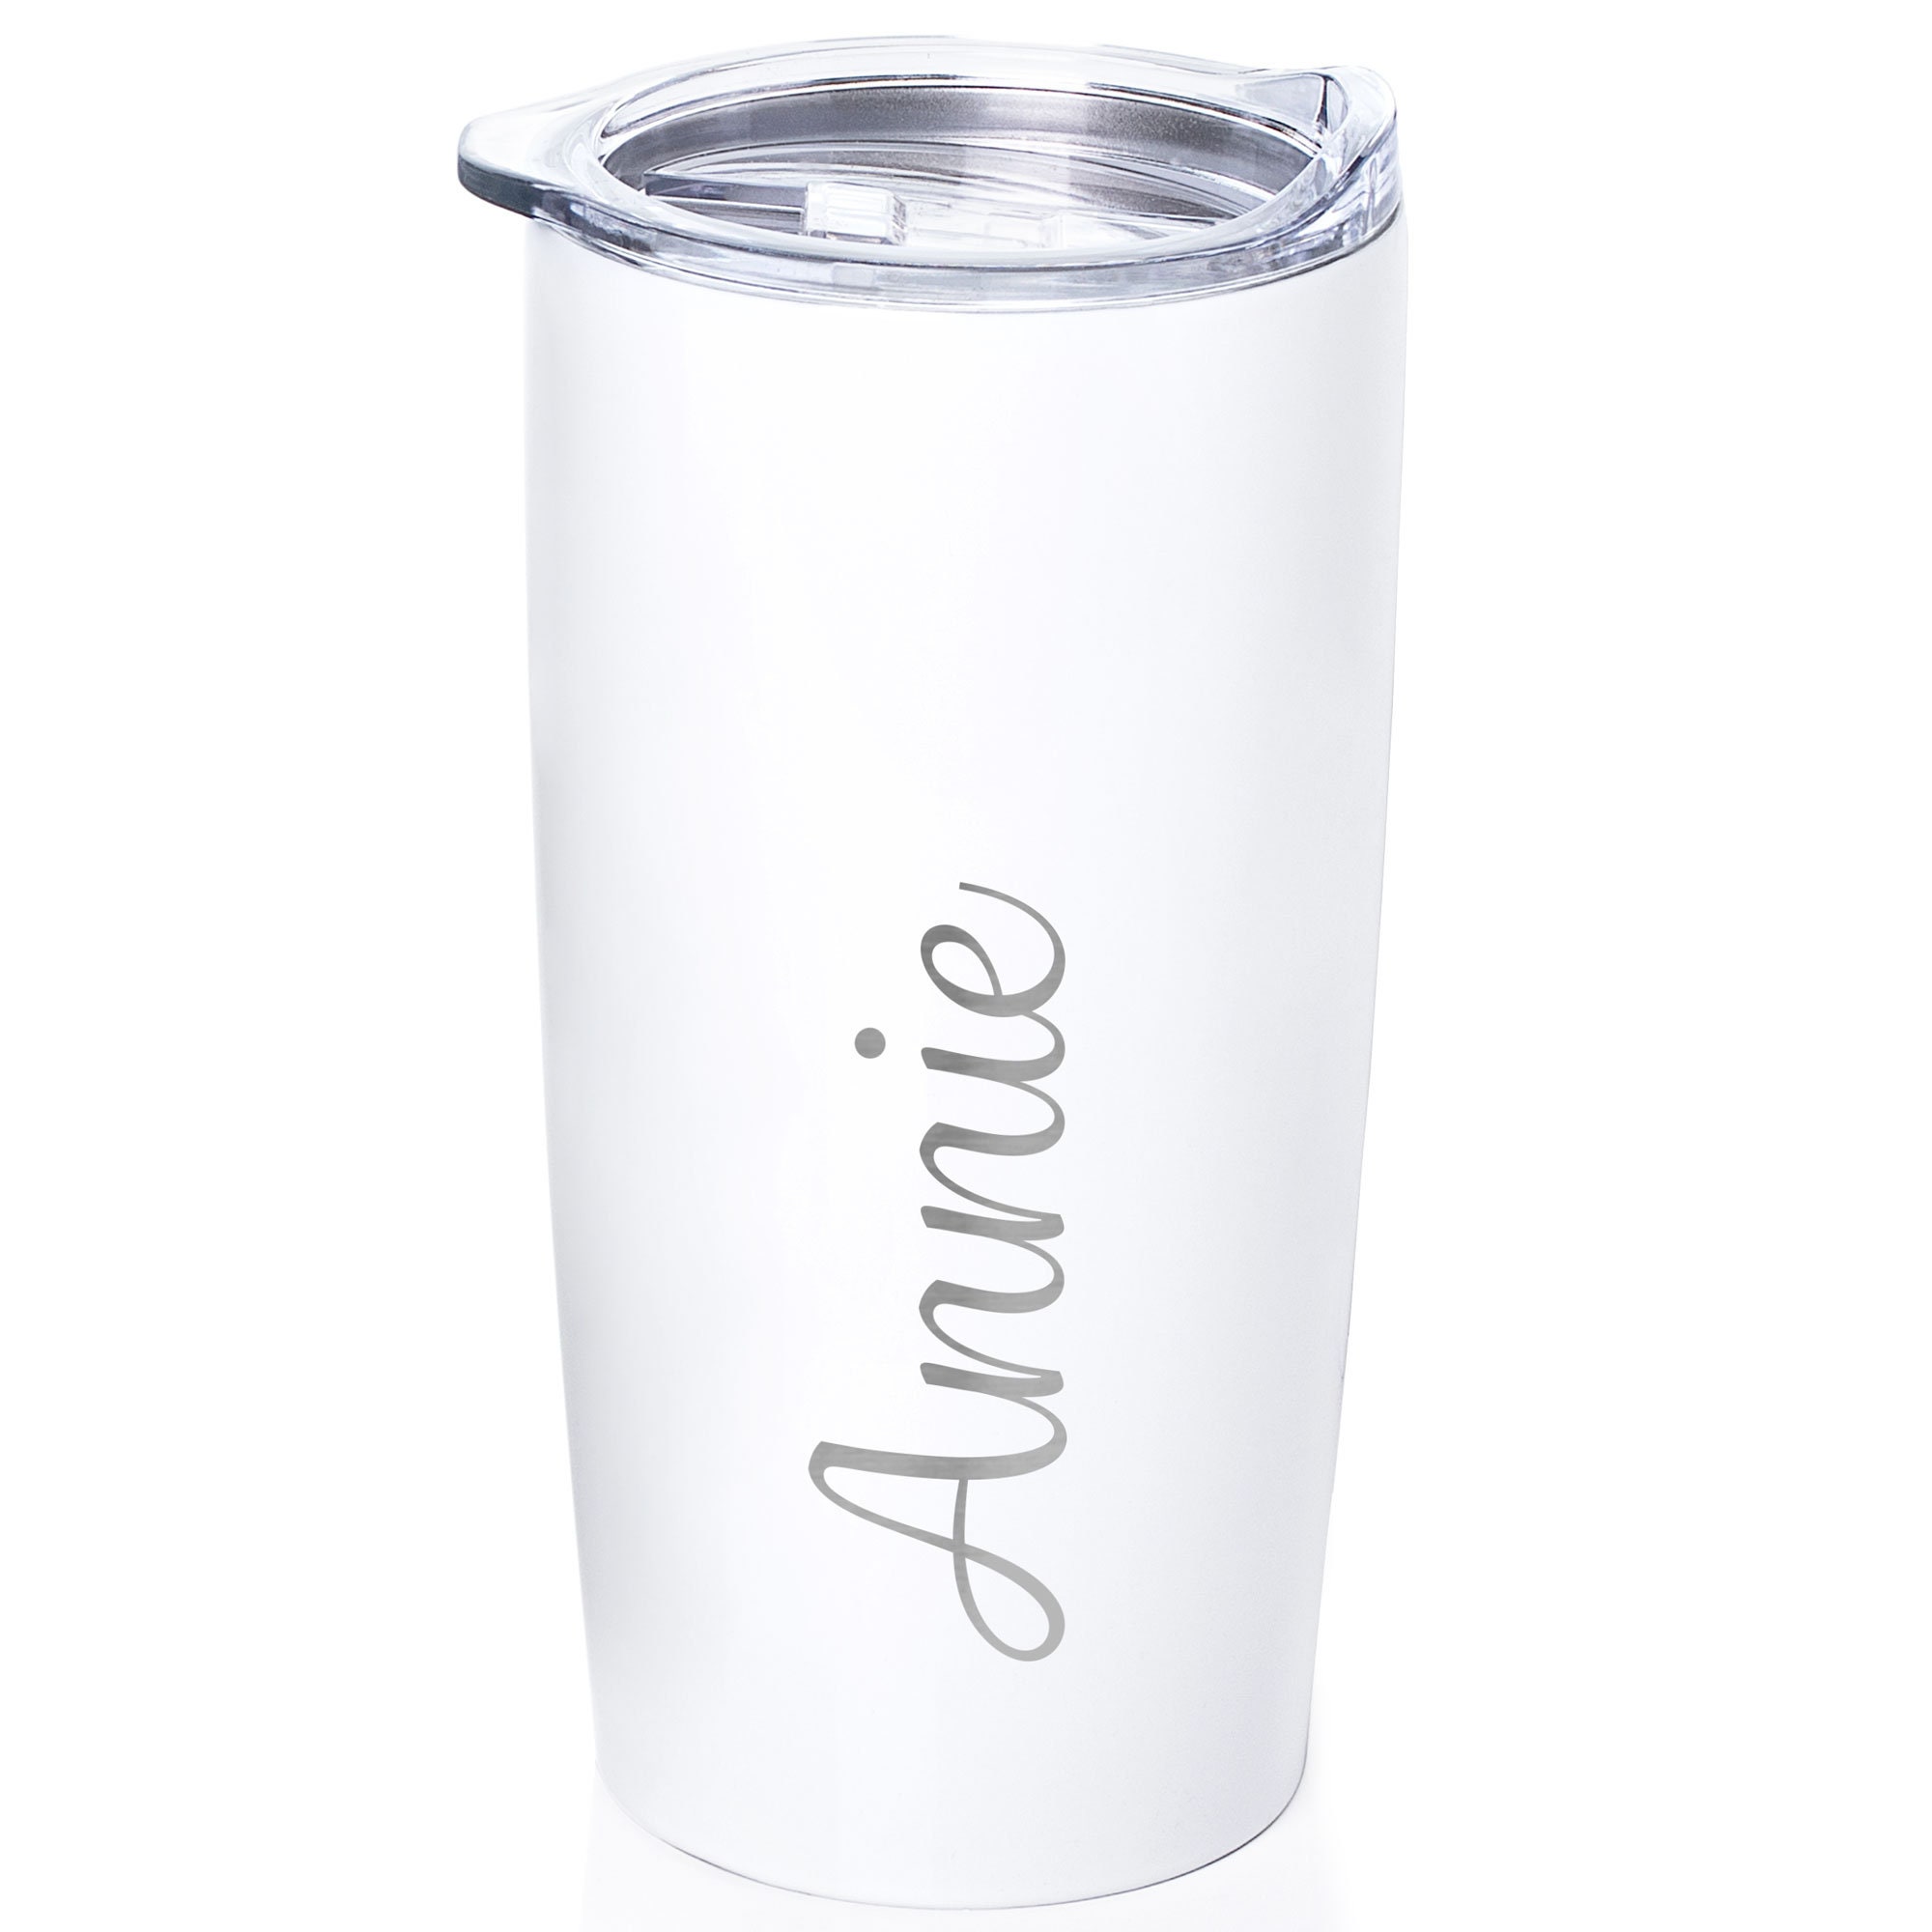 Personalized Tumbler with Engraved Name - 12 Designs, 20 Oz Coffee Tumbler  with Slider Lid, White, D…See more Personalized Tumbler with Engraved Name